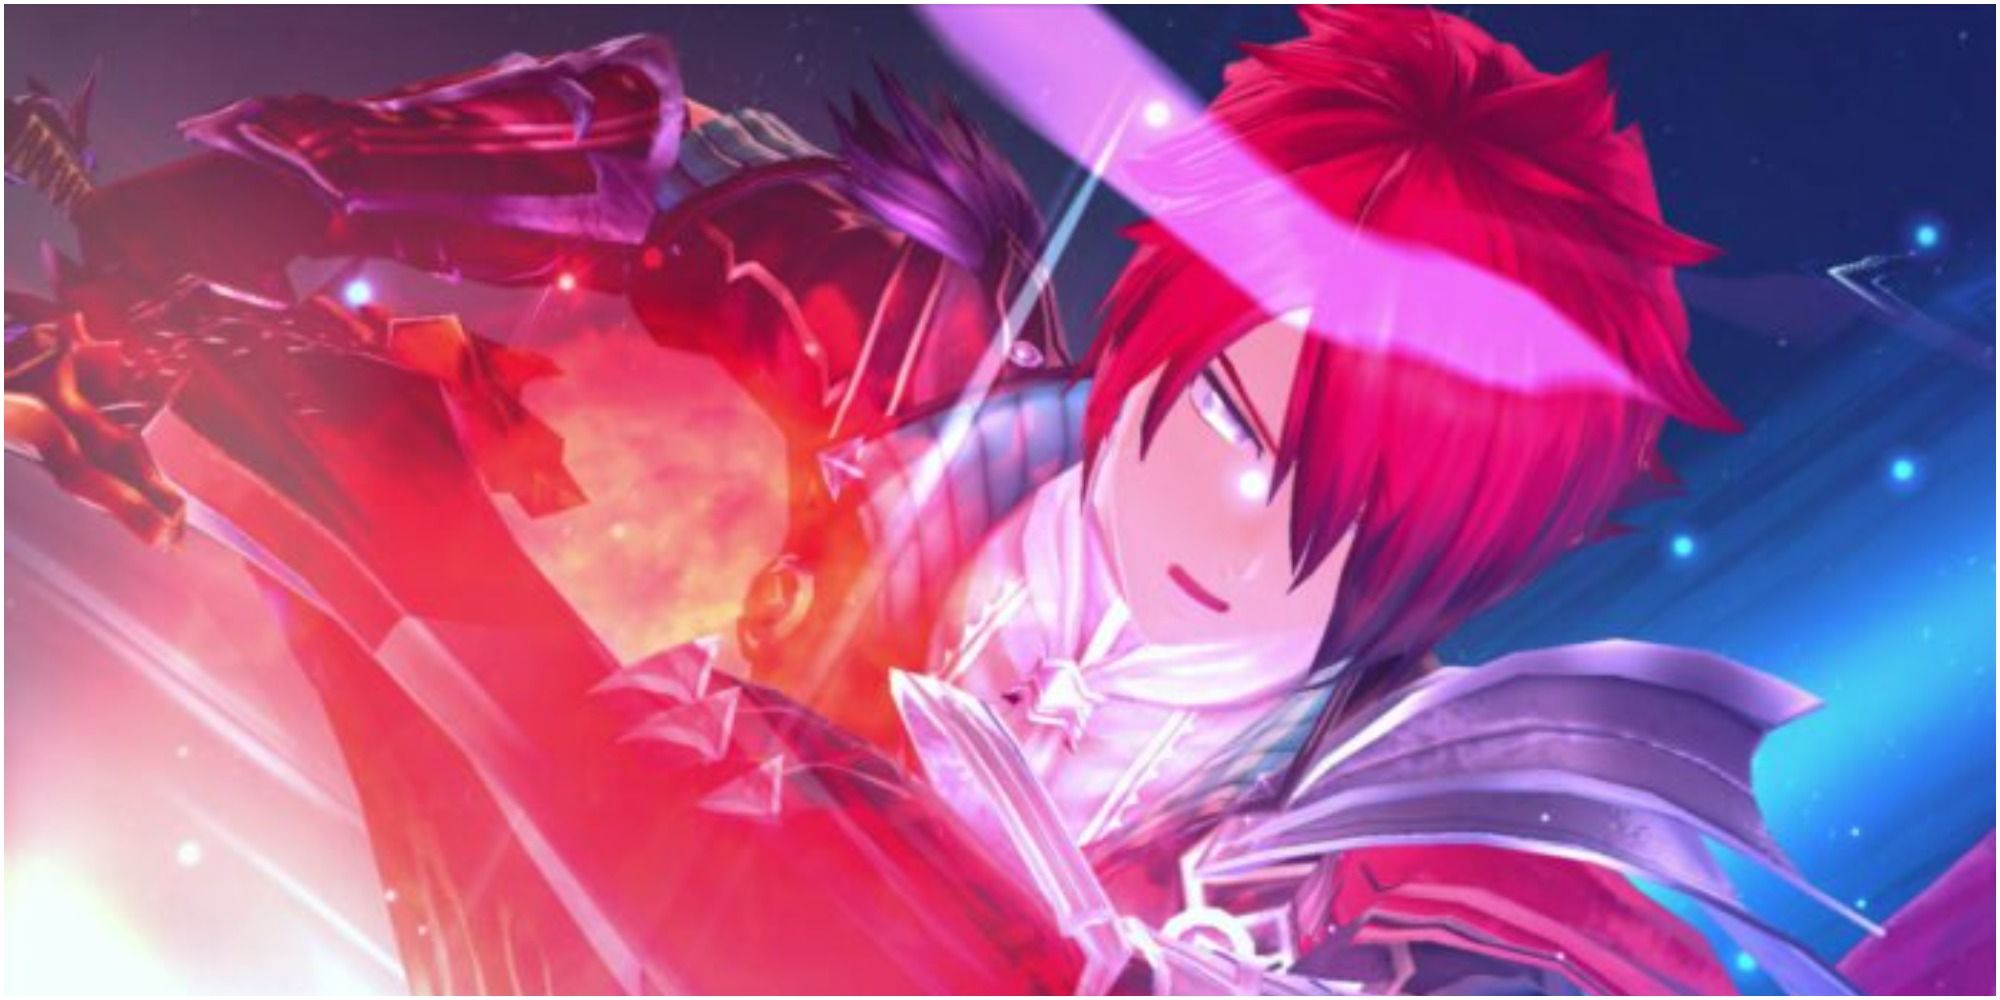 Adol activating his powers